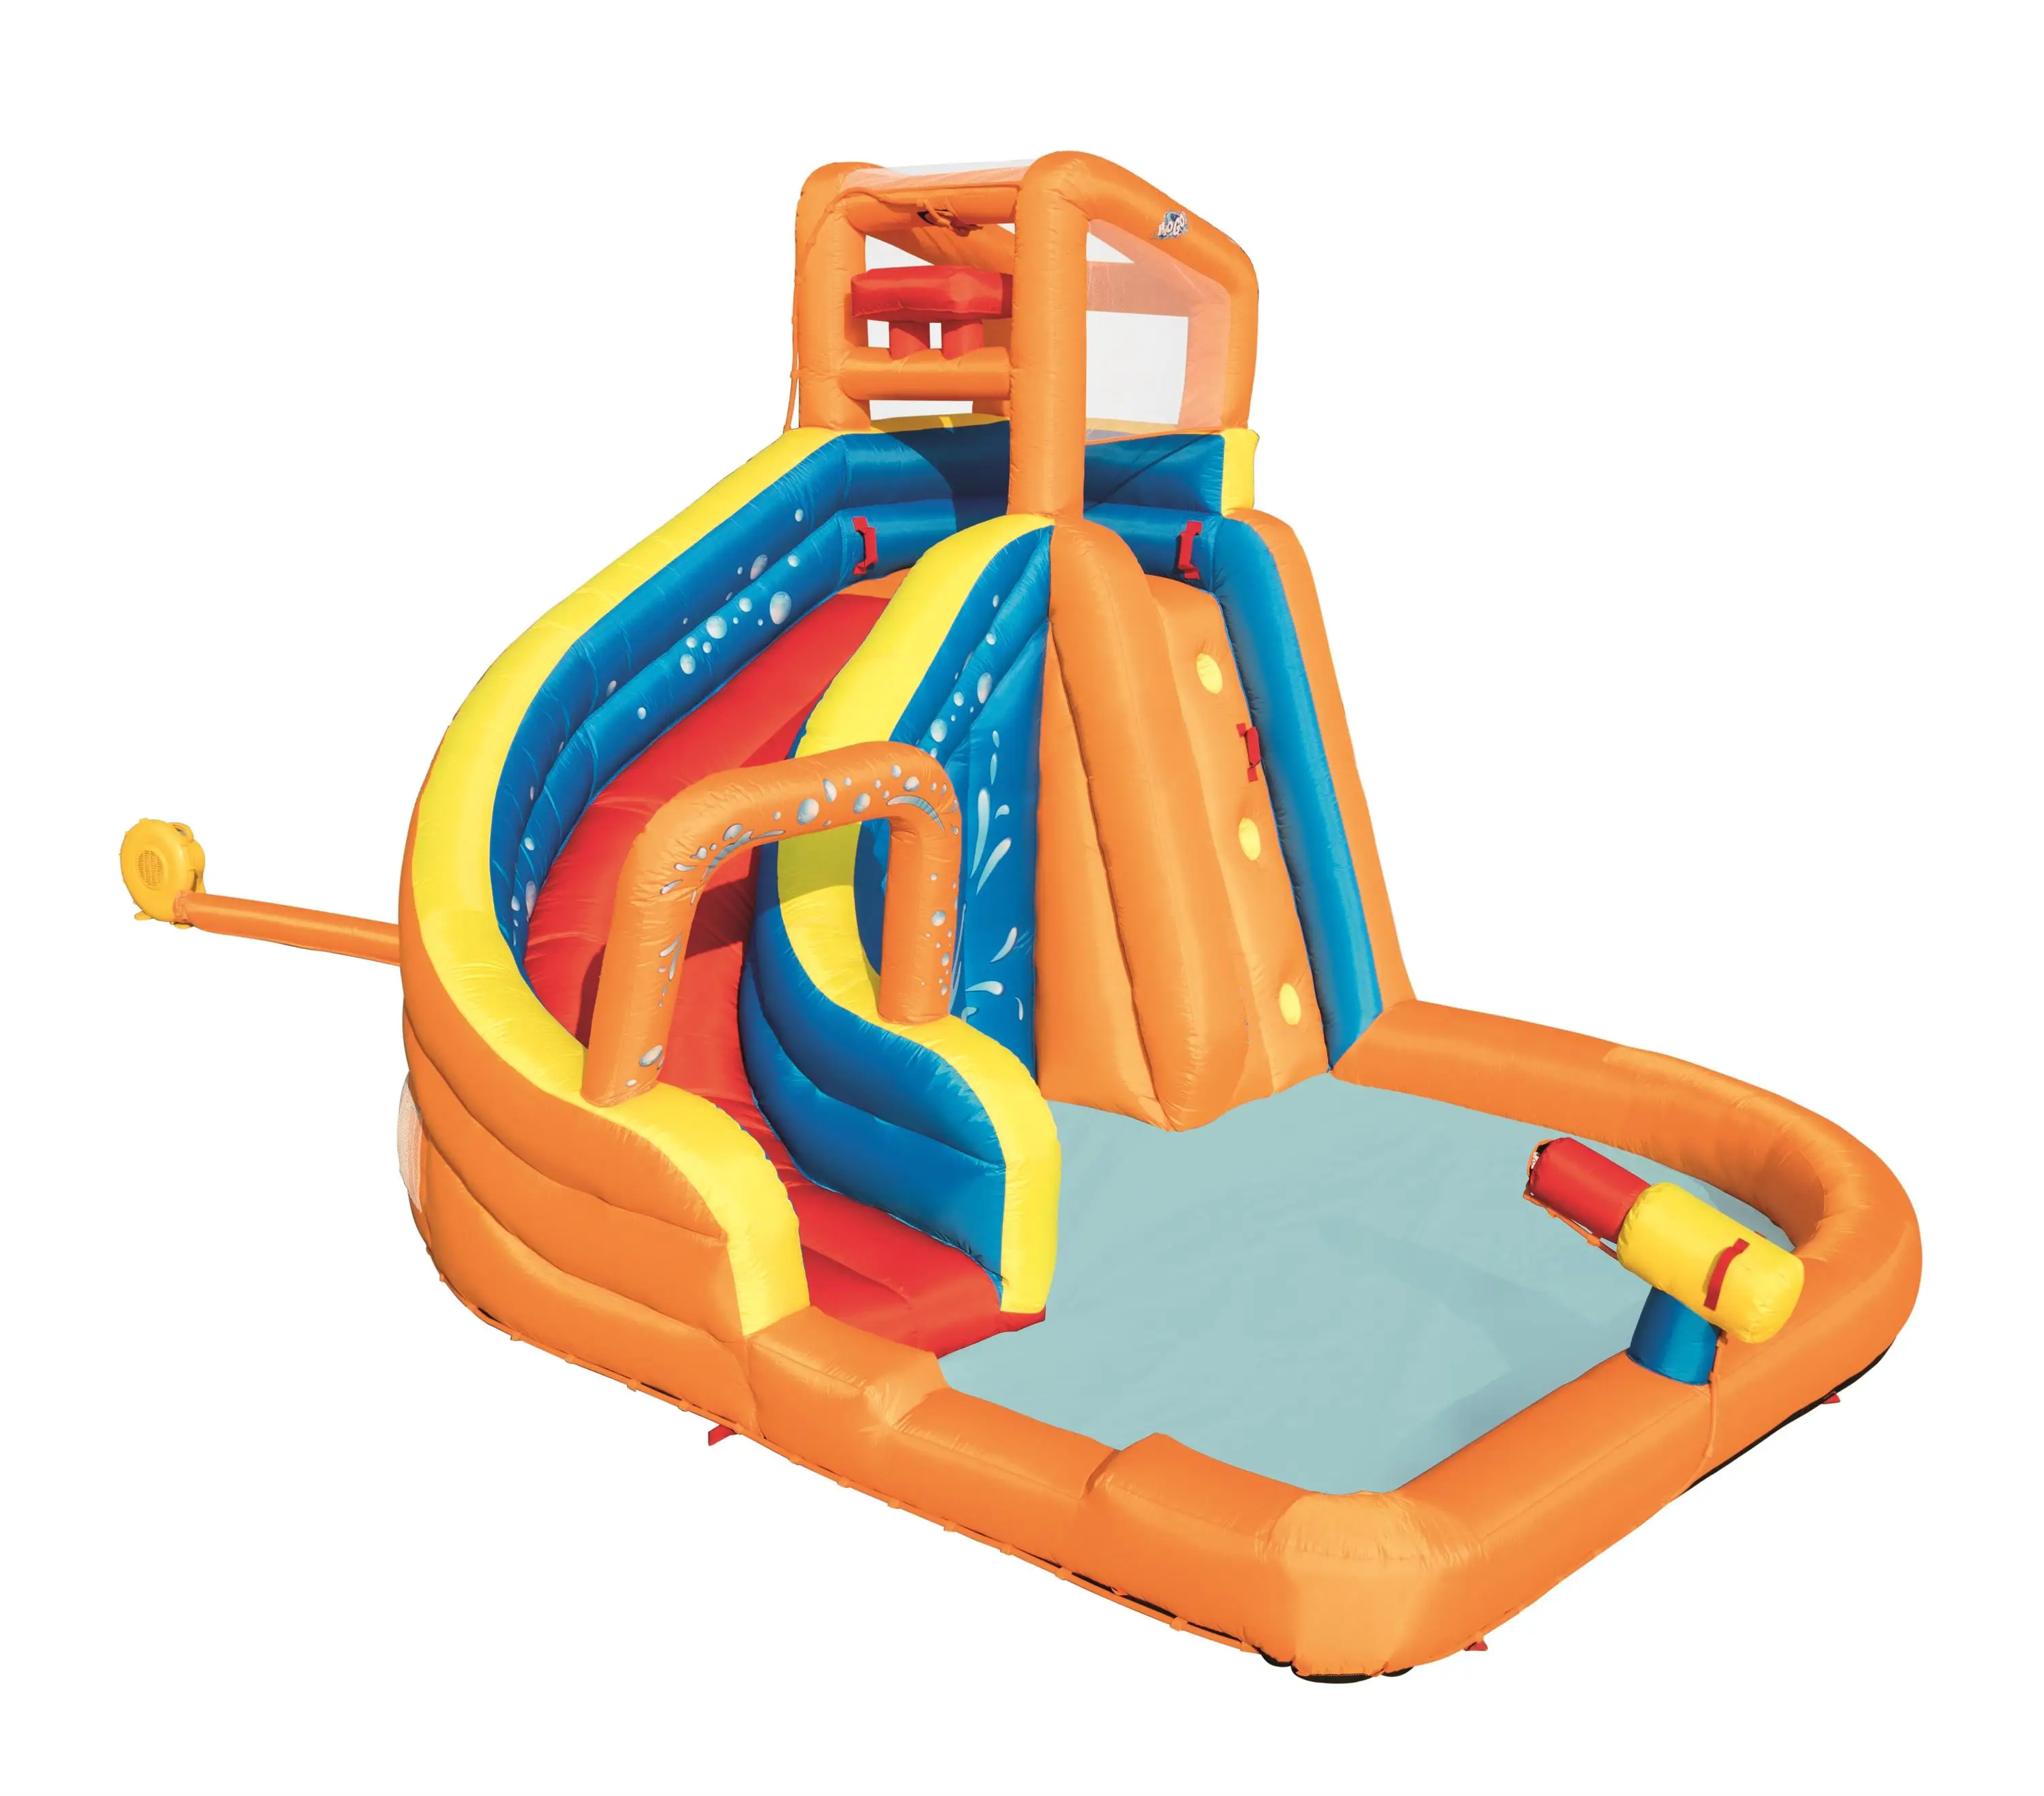 

Bestway 53301 inflatable amusement water park with slide for kids, Colorful